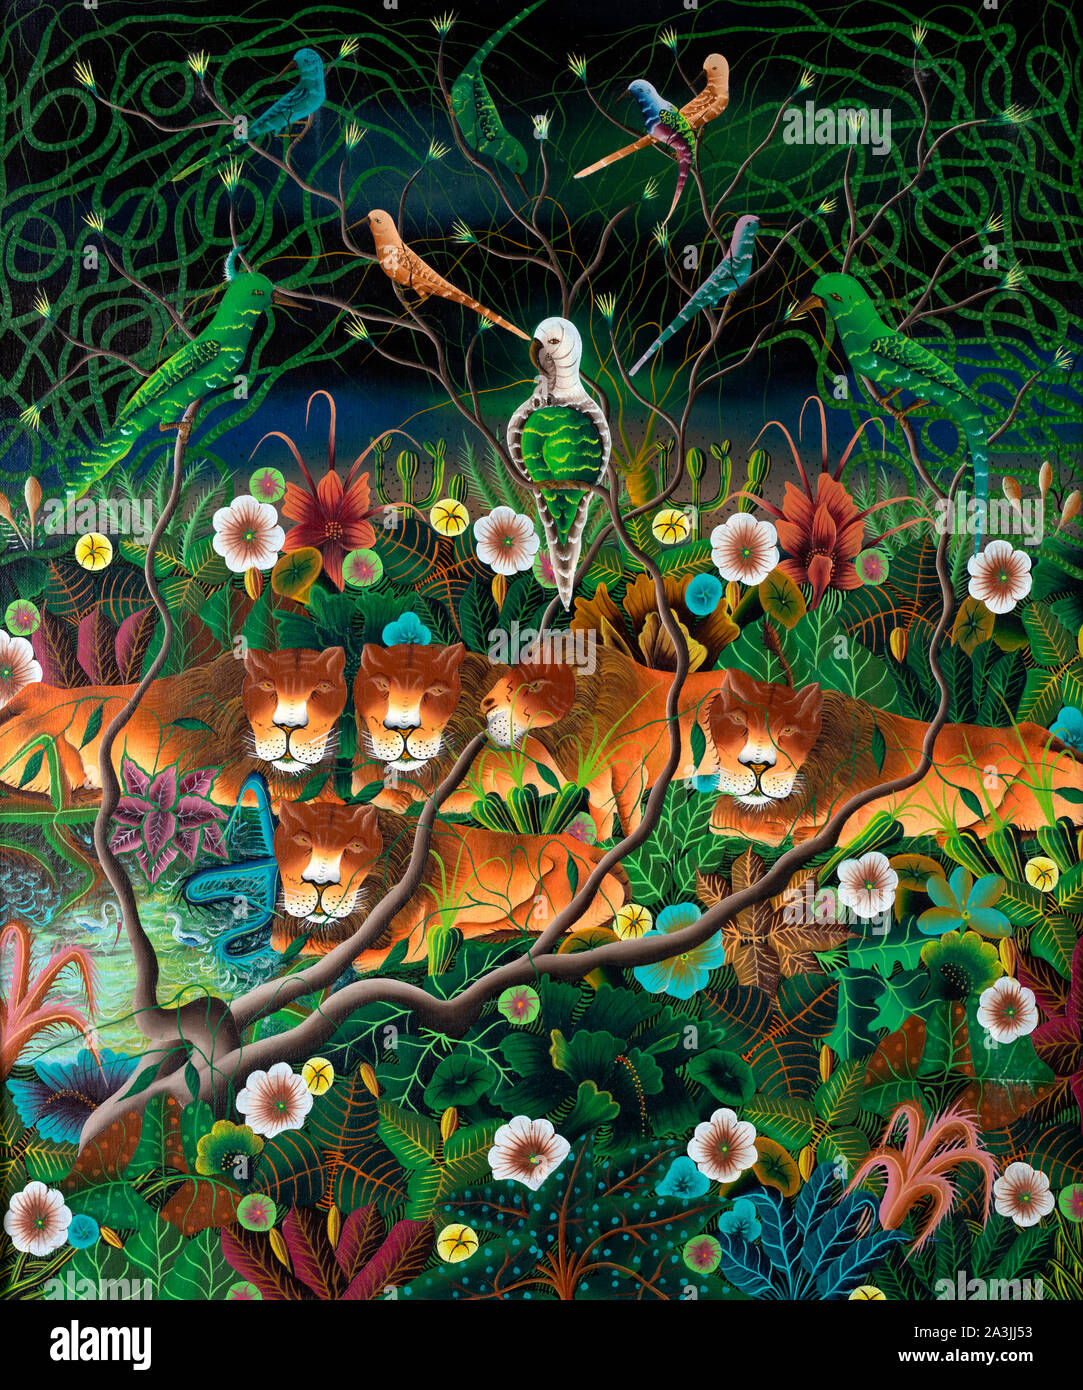 Naive jungle scene composition of lionesses, birds, tropical plants and flowers painted in the style of Haitian art. Stock Photo